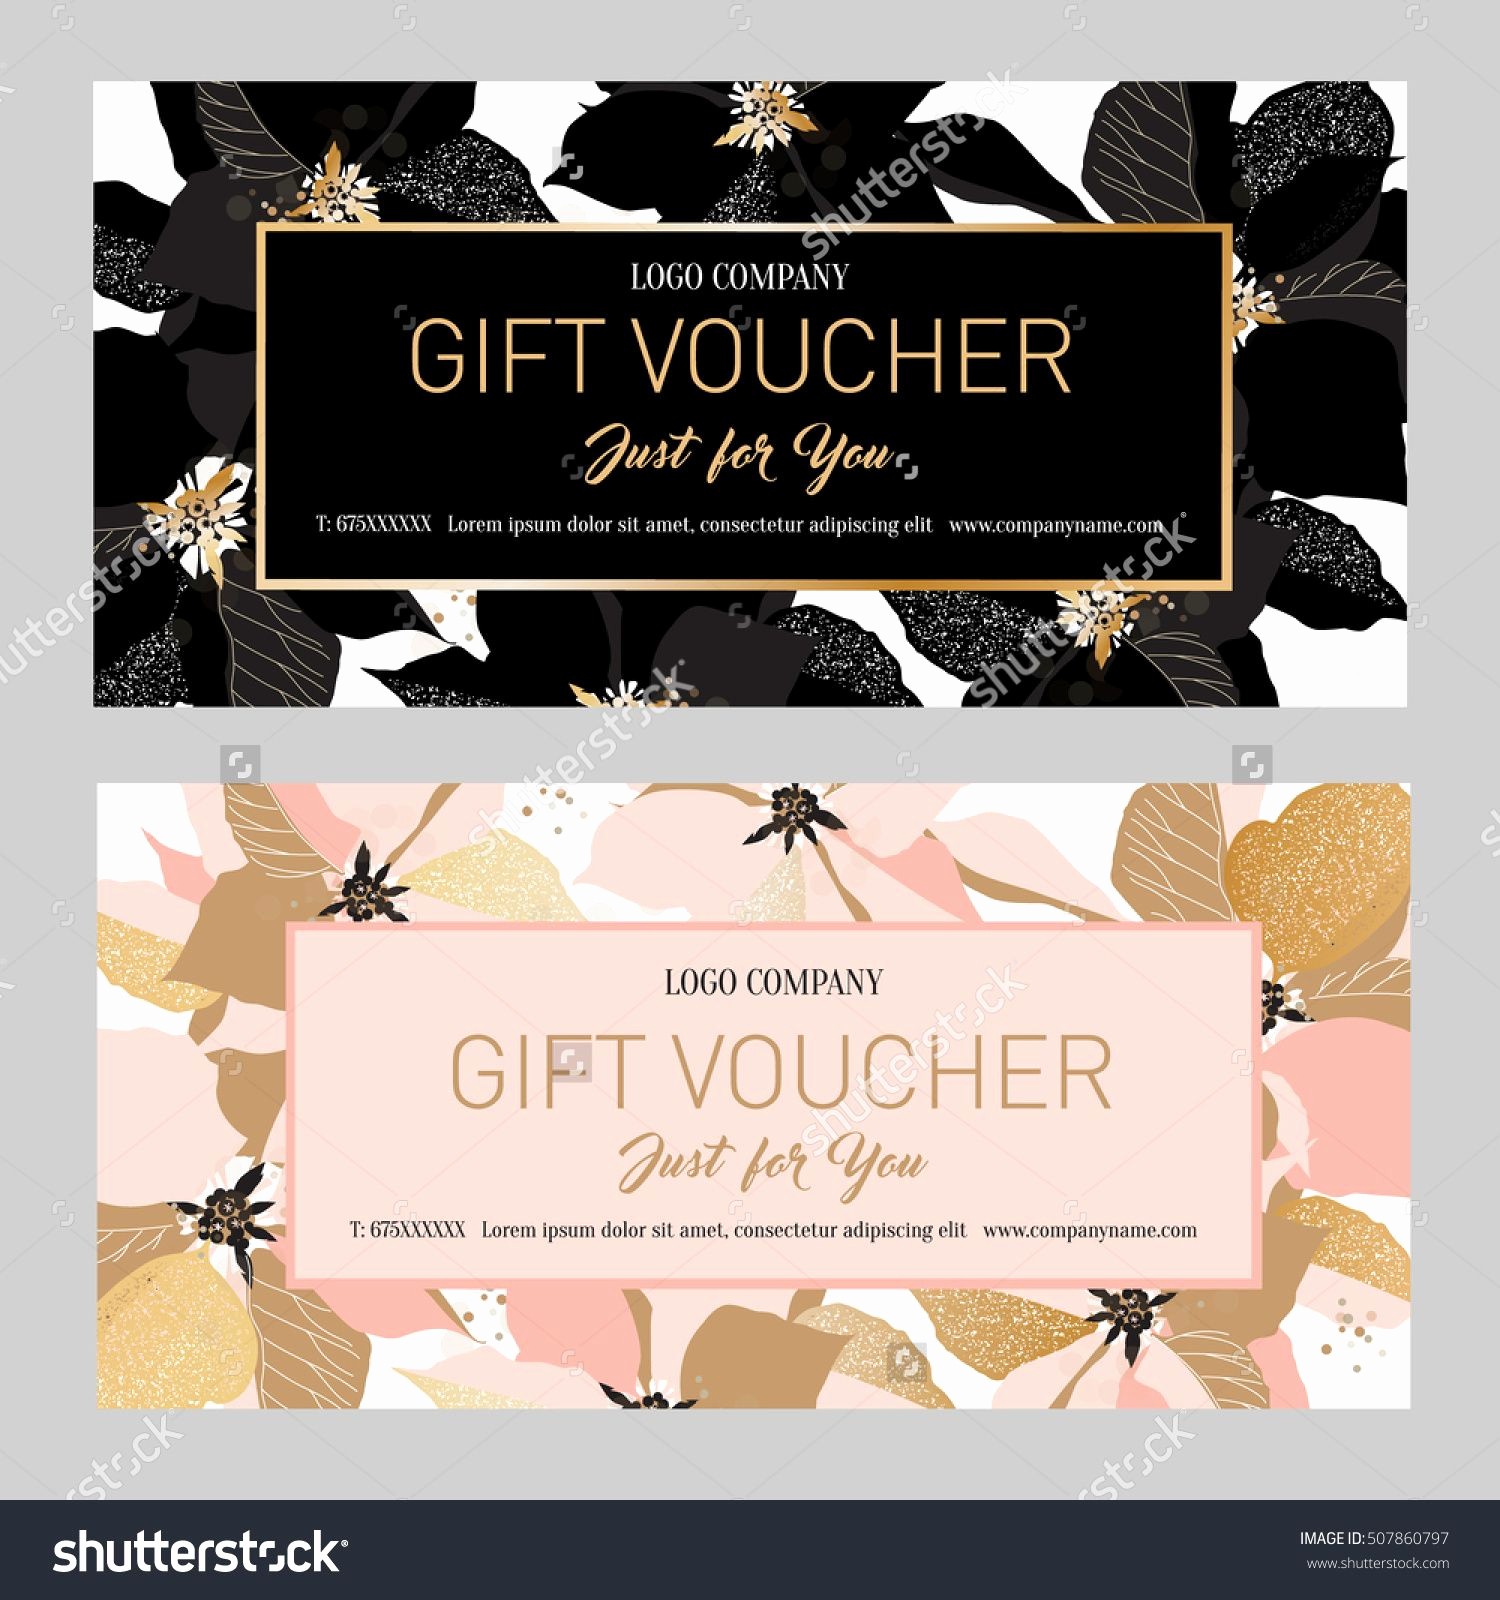 Cooking Class Gift Certificate Template Unique Gift Premium Certificate Gift Card Gift Voucher Coupon